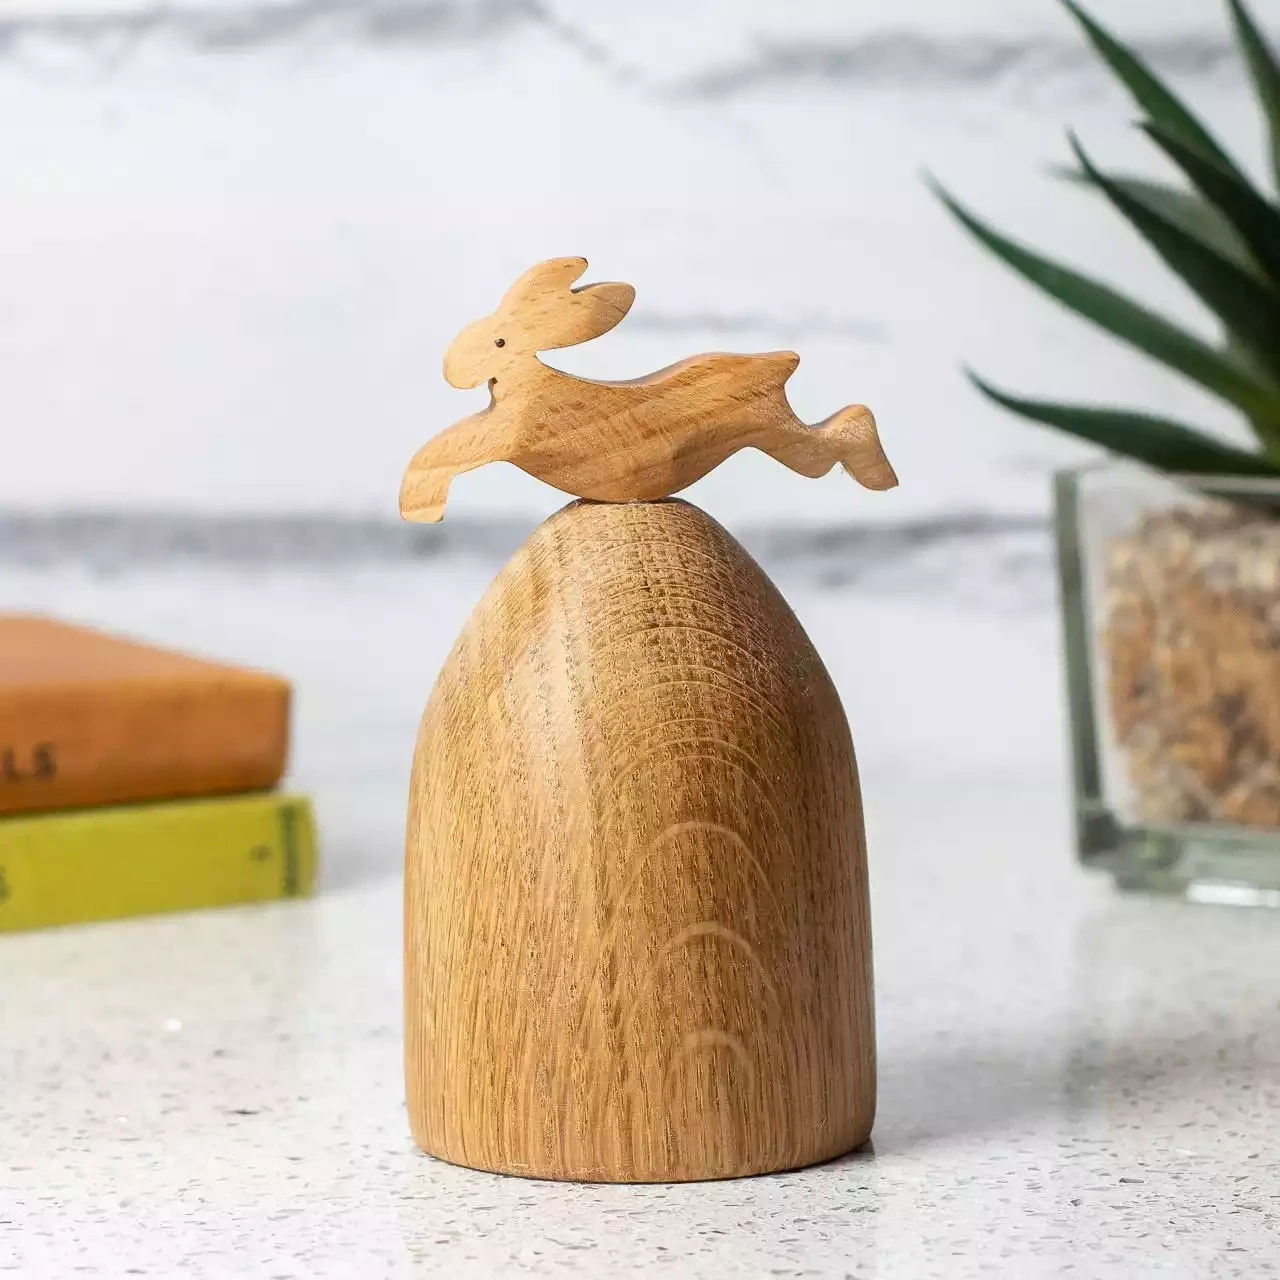 Running Hare Paperweight - Oak and Beech by Beamers Designs